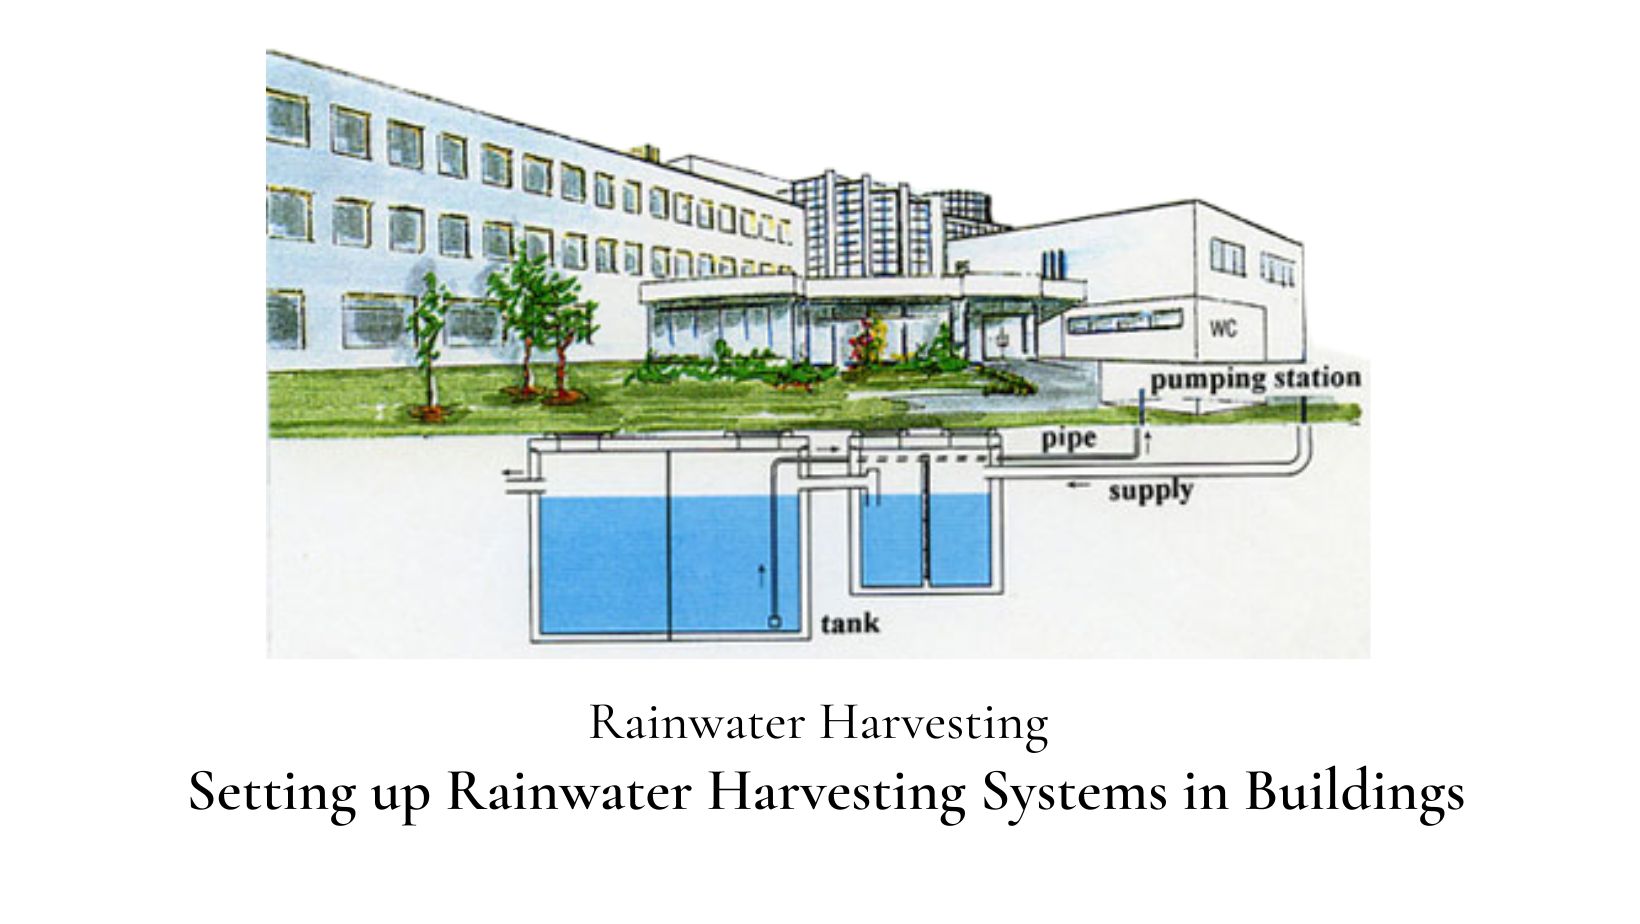 Rain Water Harvesting Systems - bioCycle™ Septic Tank & Wastewater  Treatment Solutions